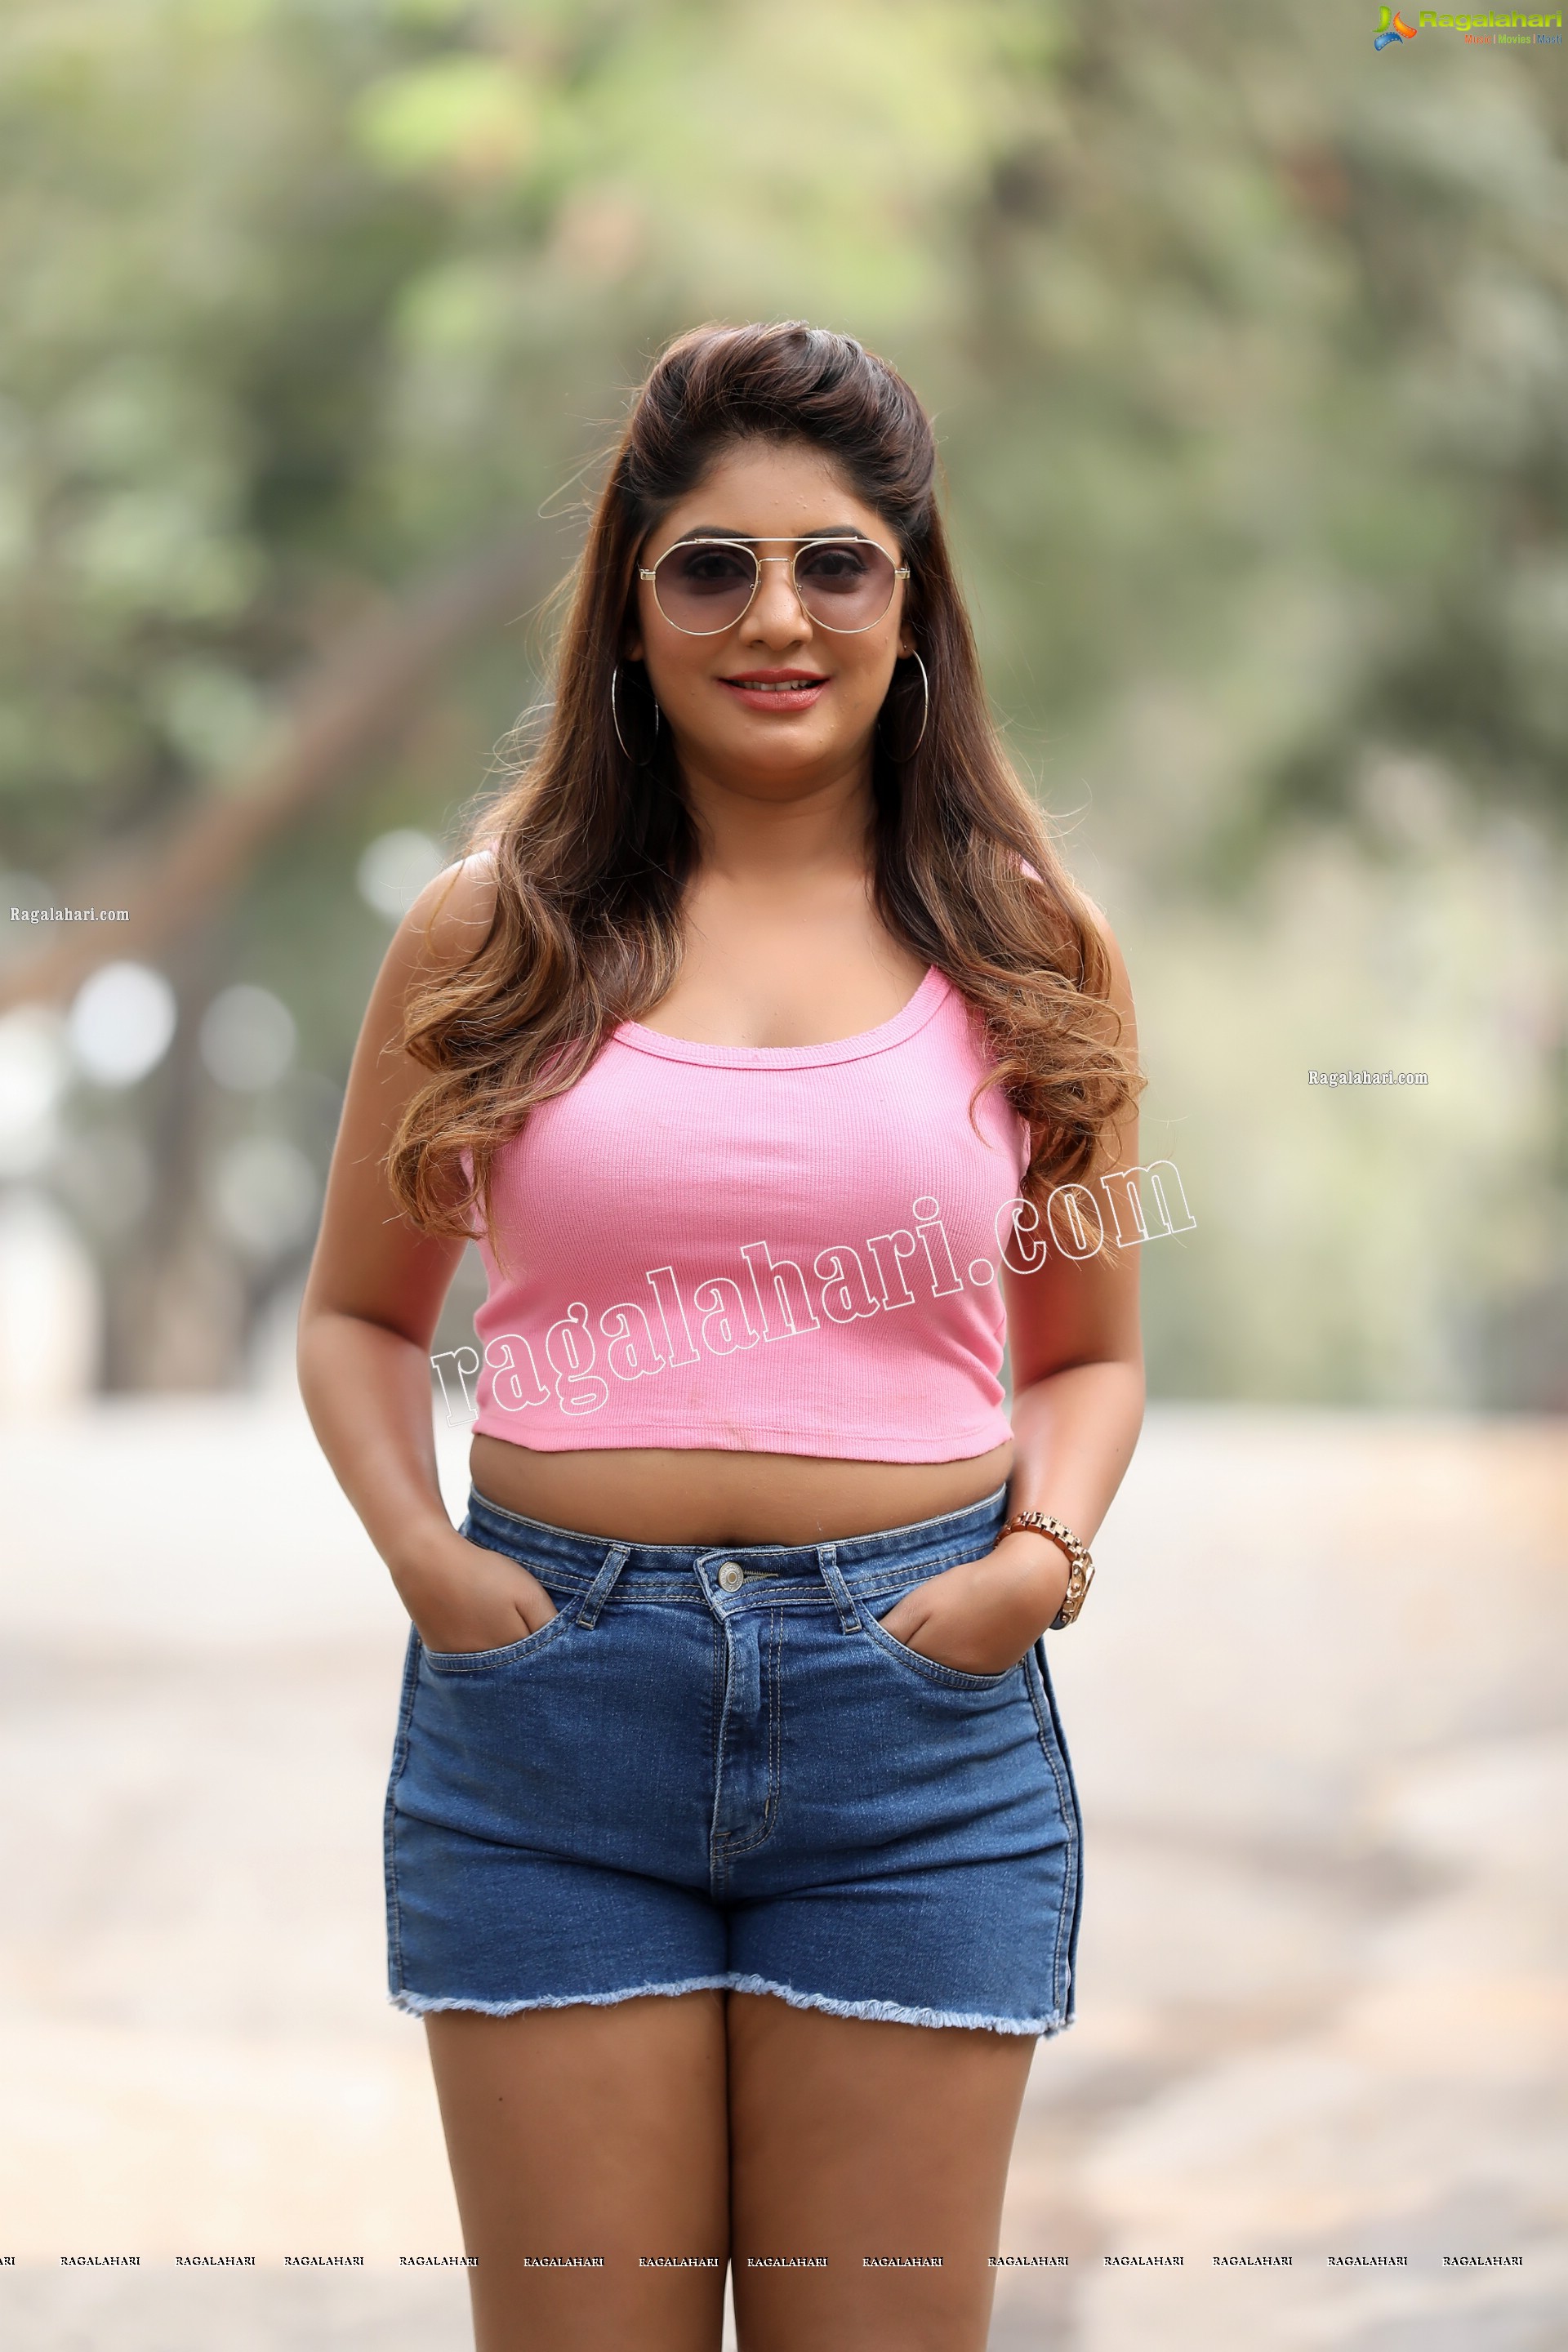 Sejal Mandavia in Pink Cropped Tank Top and Denim Shorts Exclusive Photo Shoot